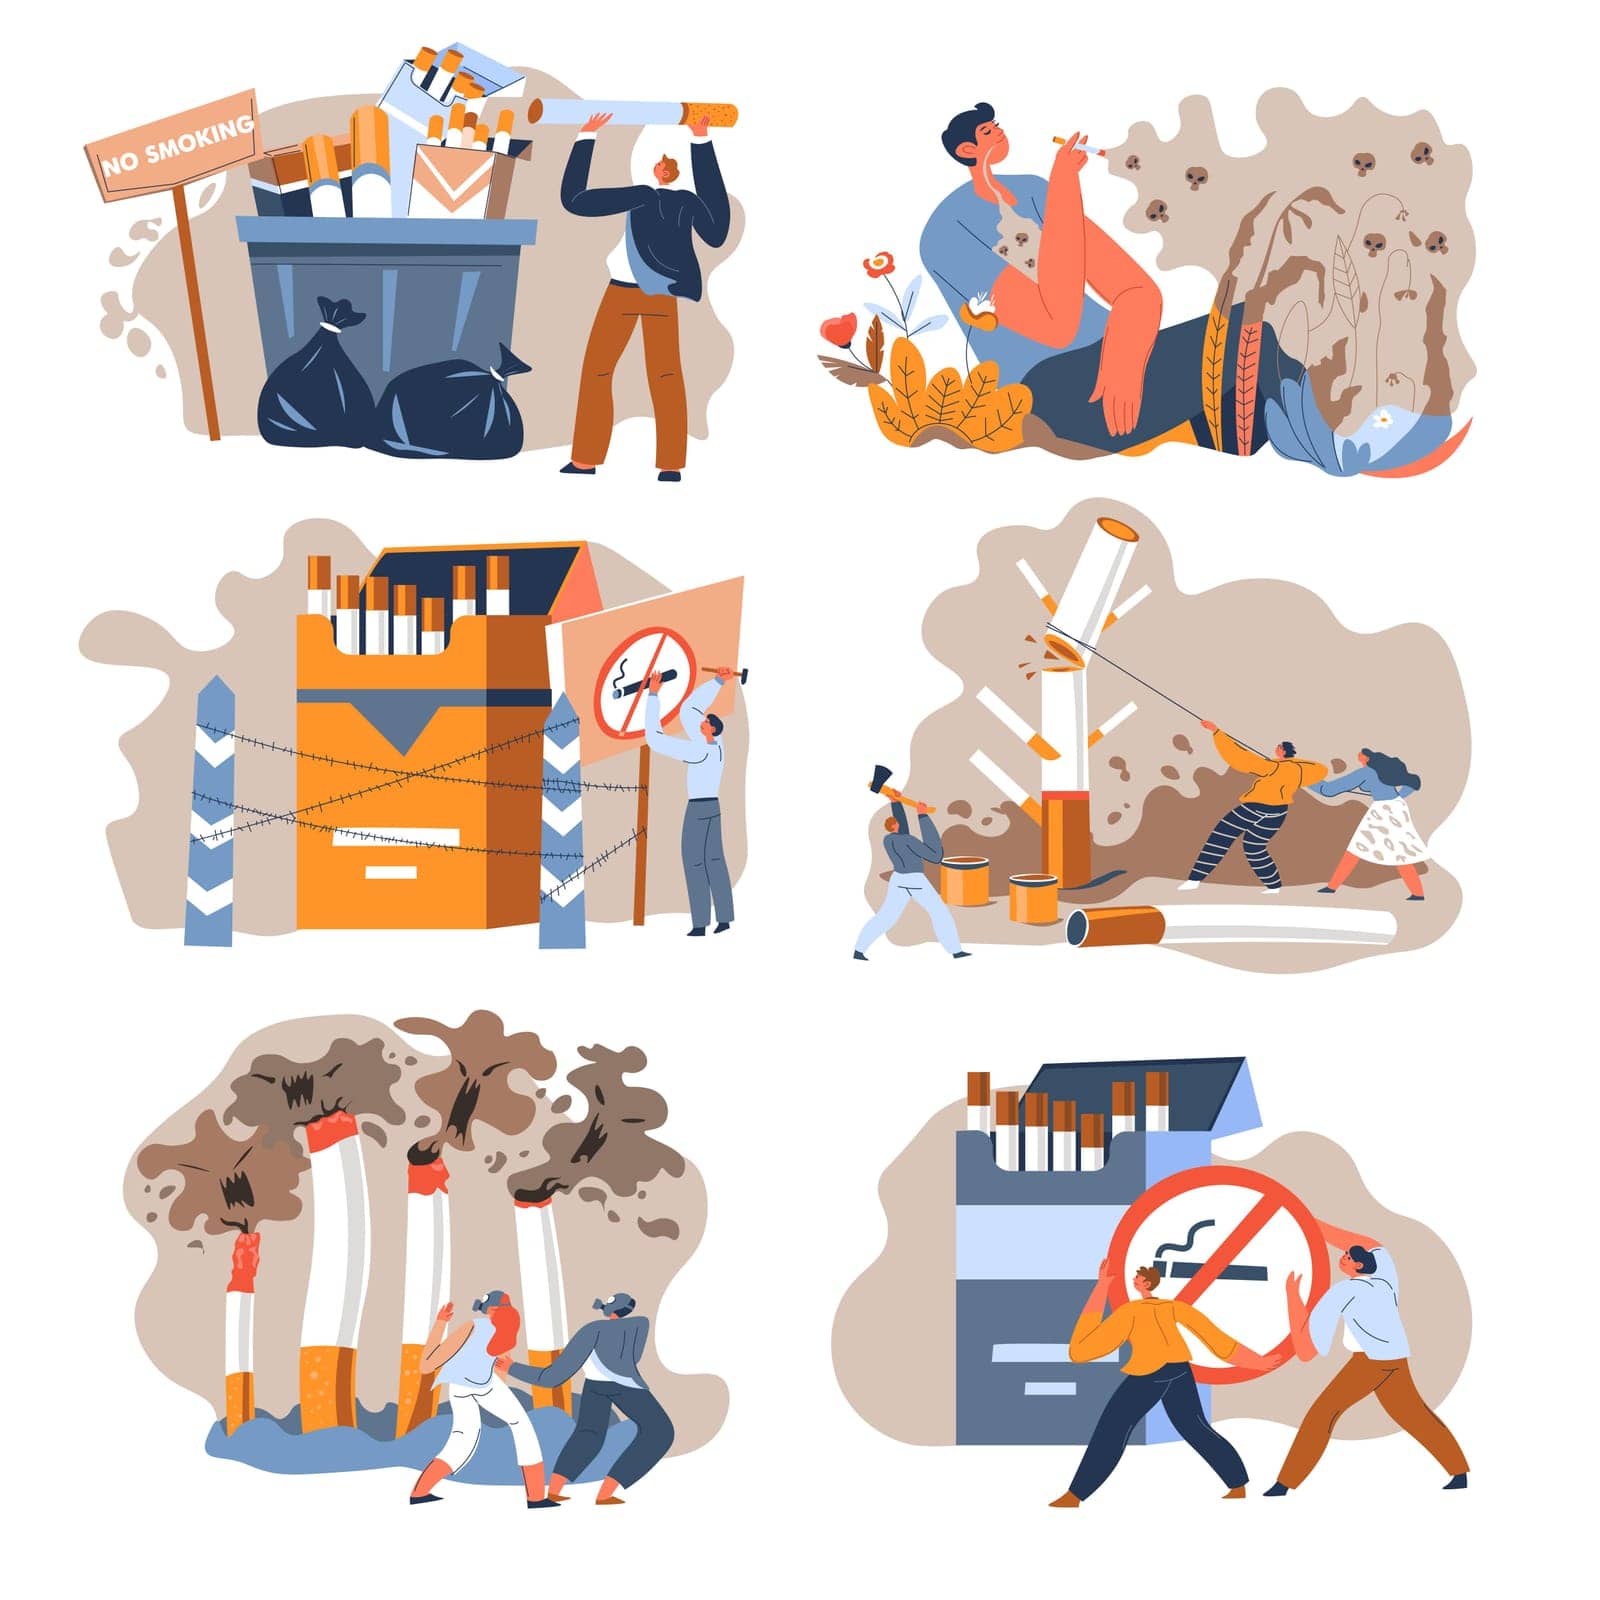 People fighting against smoking in public area, dangerous and toxic habit, forbidden and restricted. Warning information for smokers and addicted. Unhealthy lifestyle, vector in flat illustration